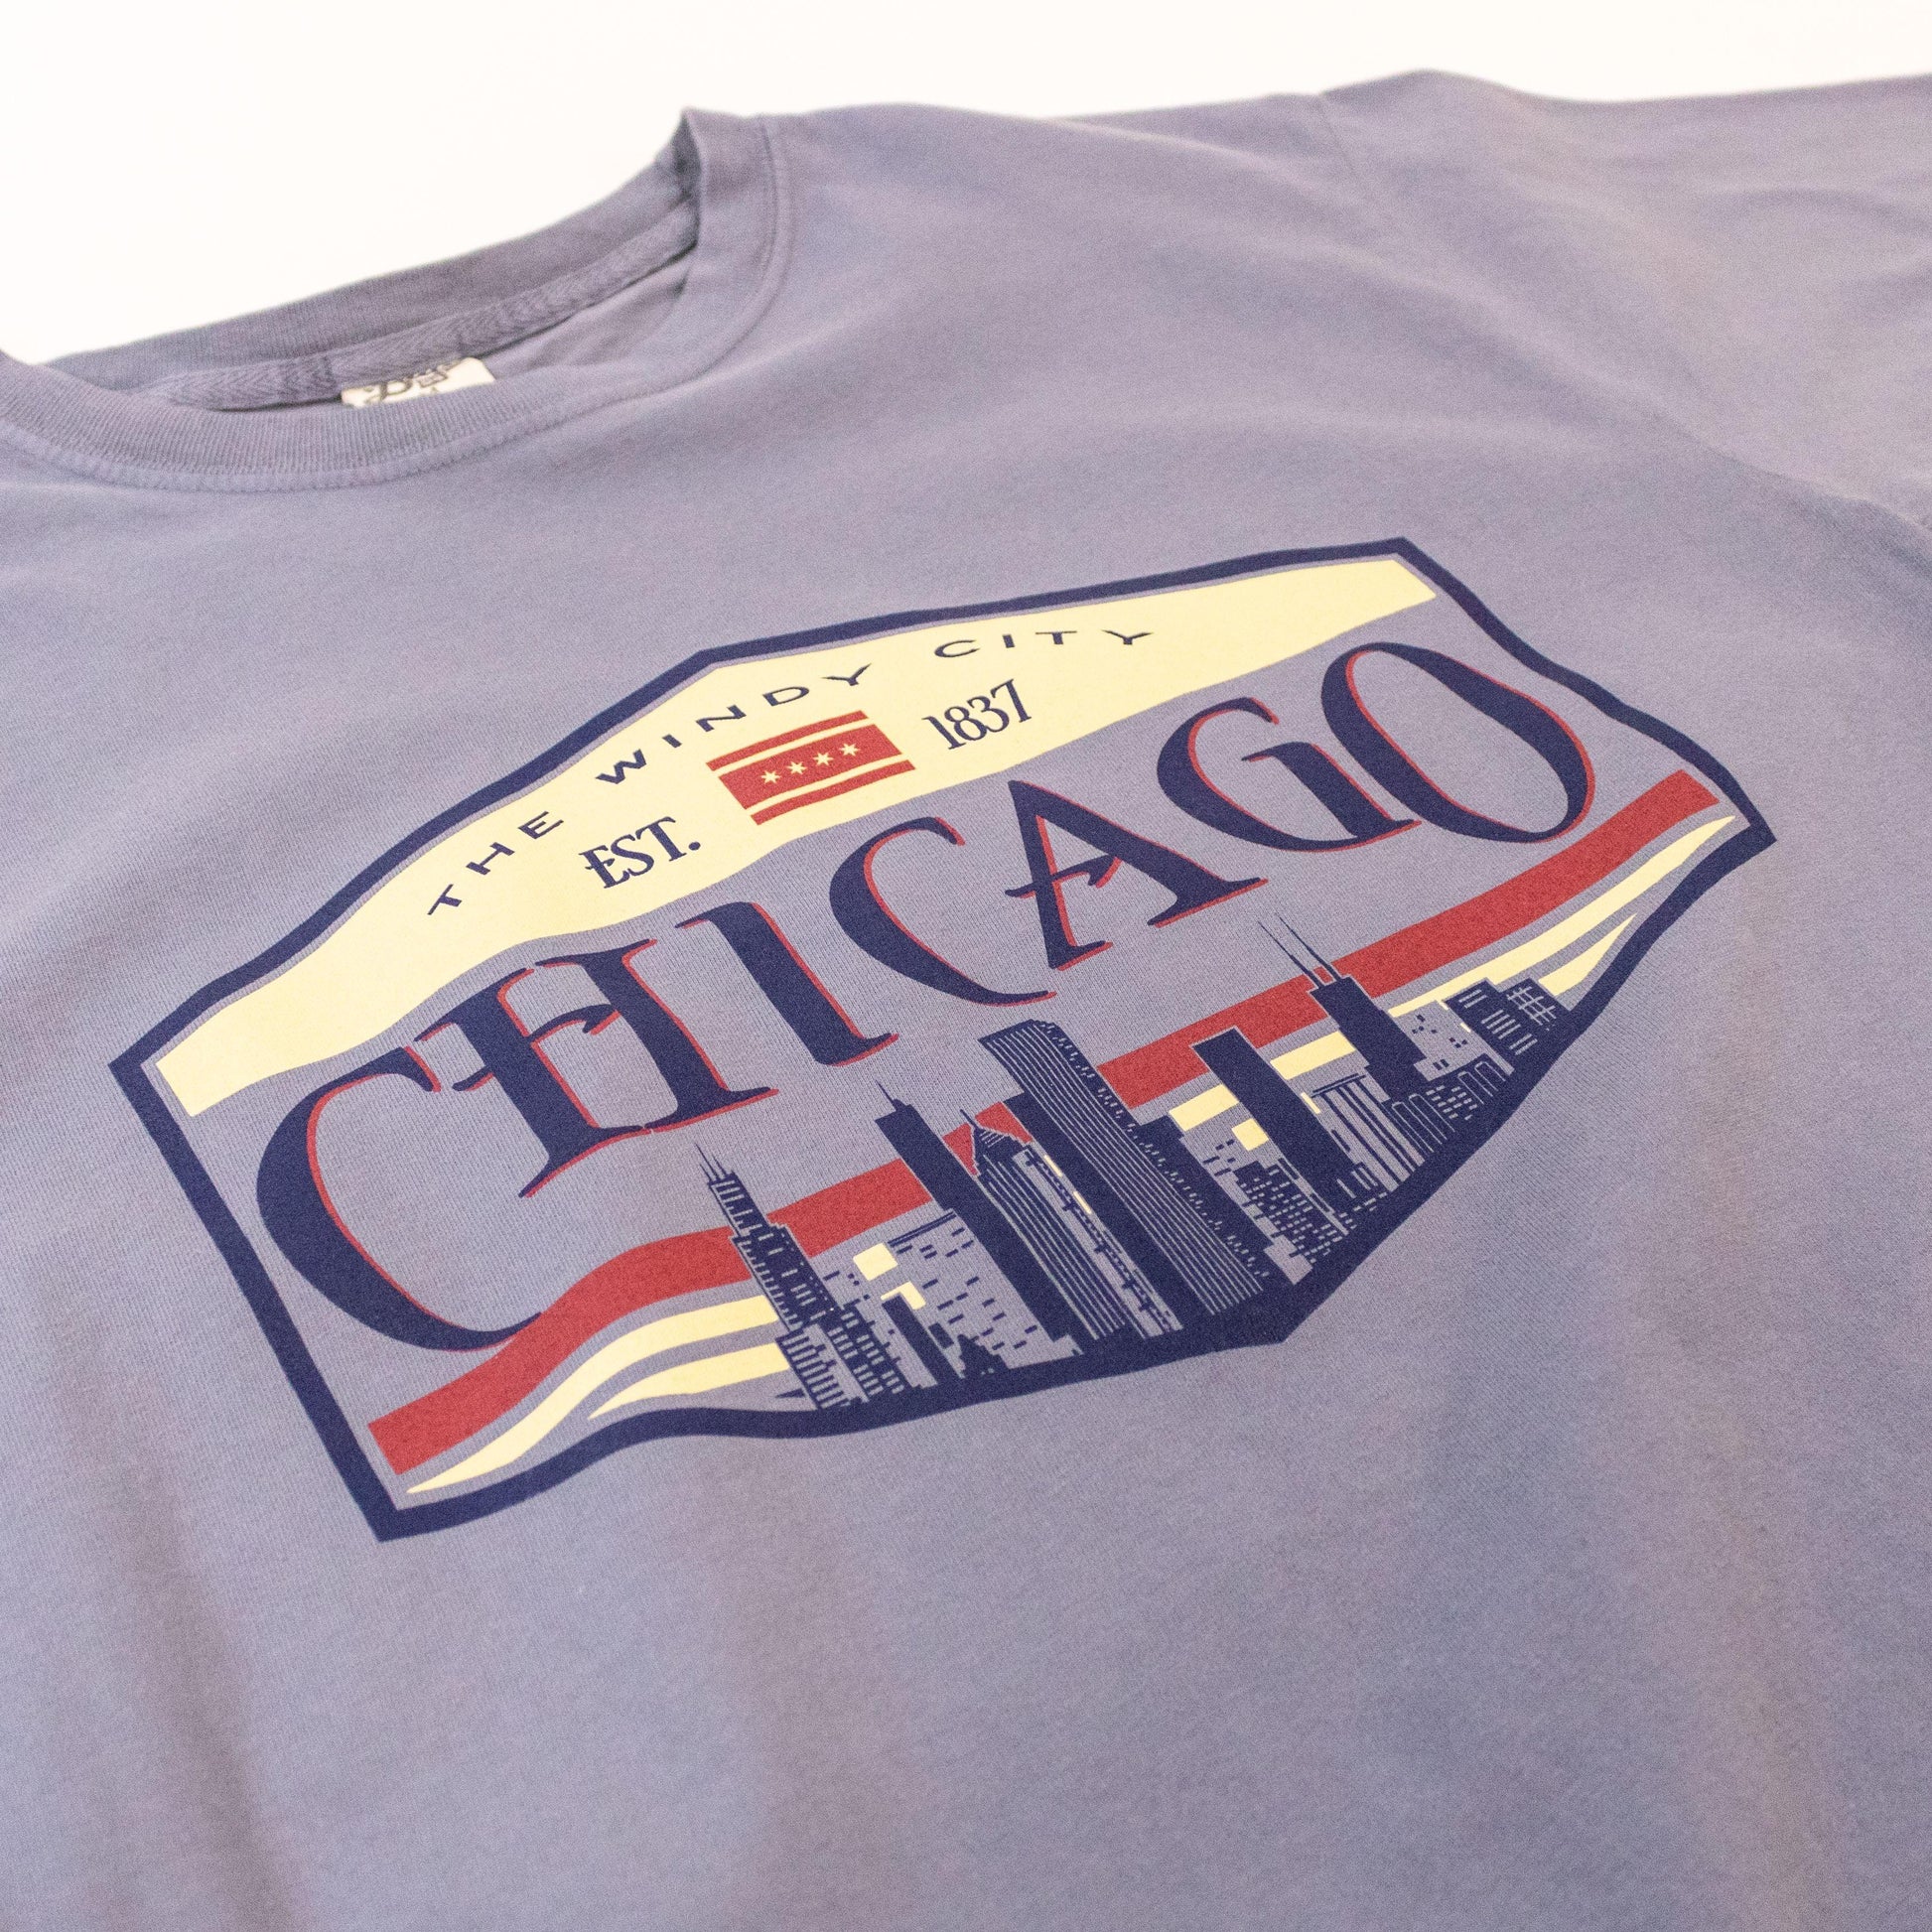 Chicago Harborage Tee - Love From USA